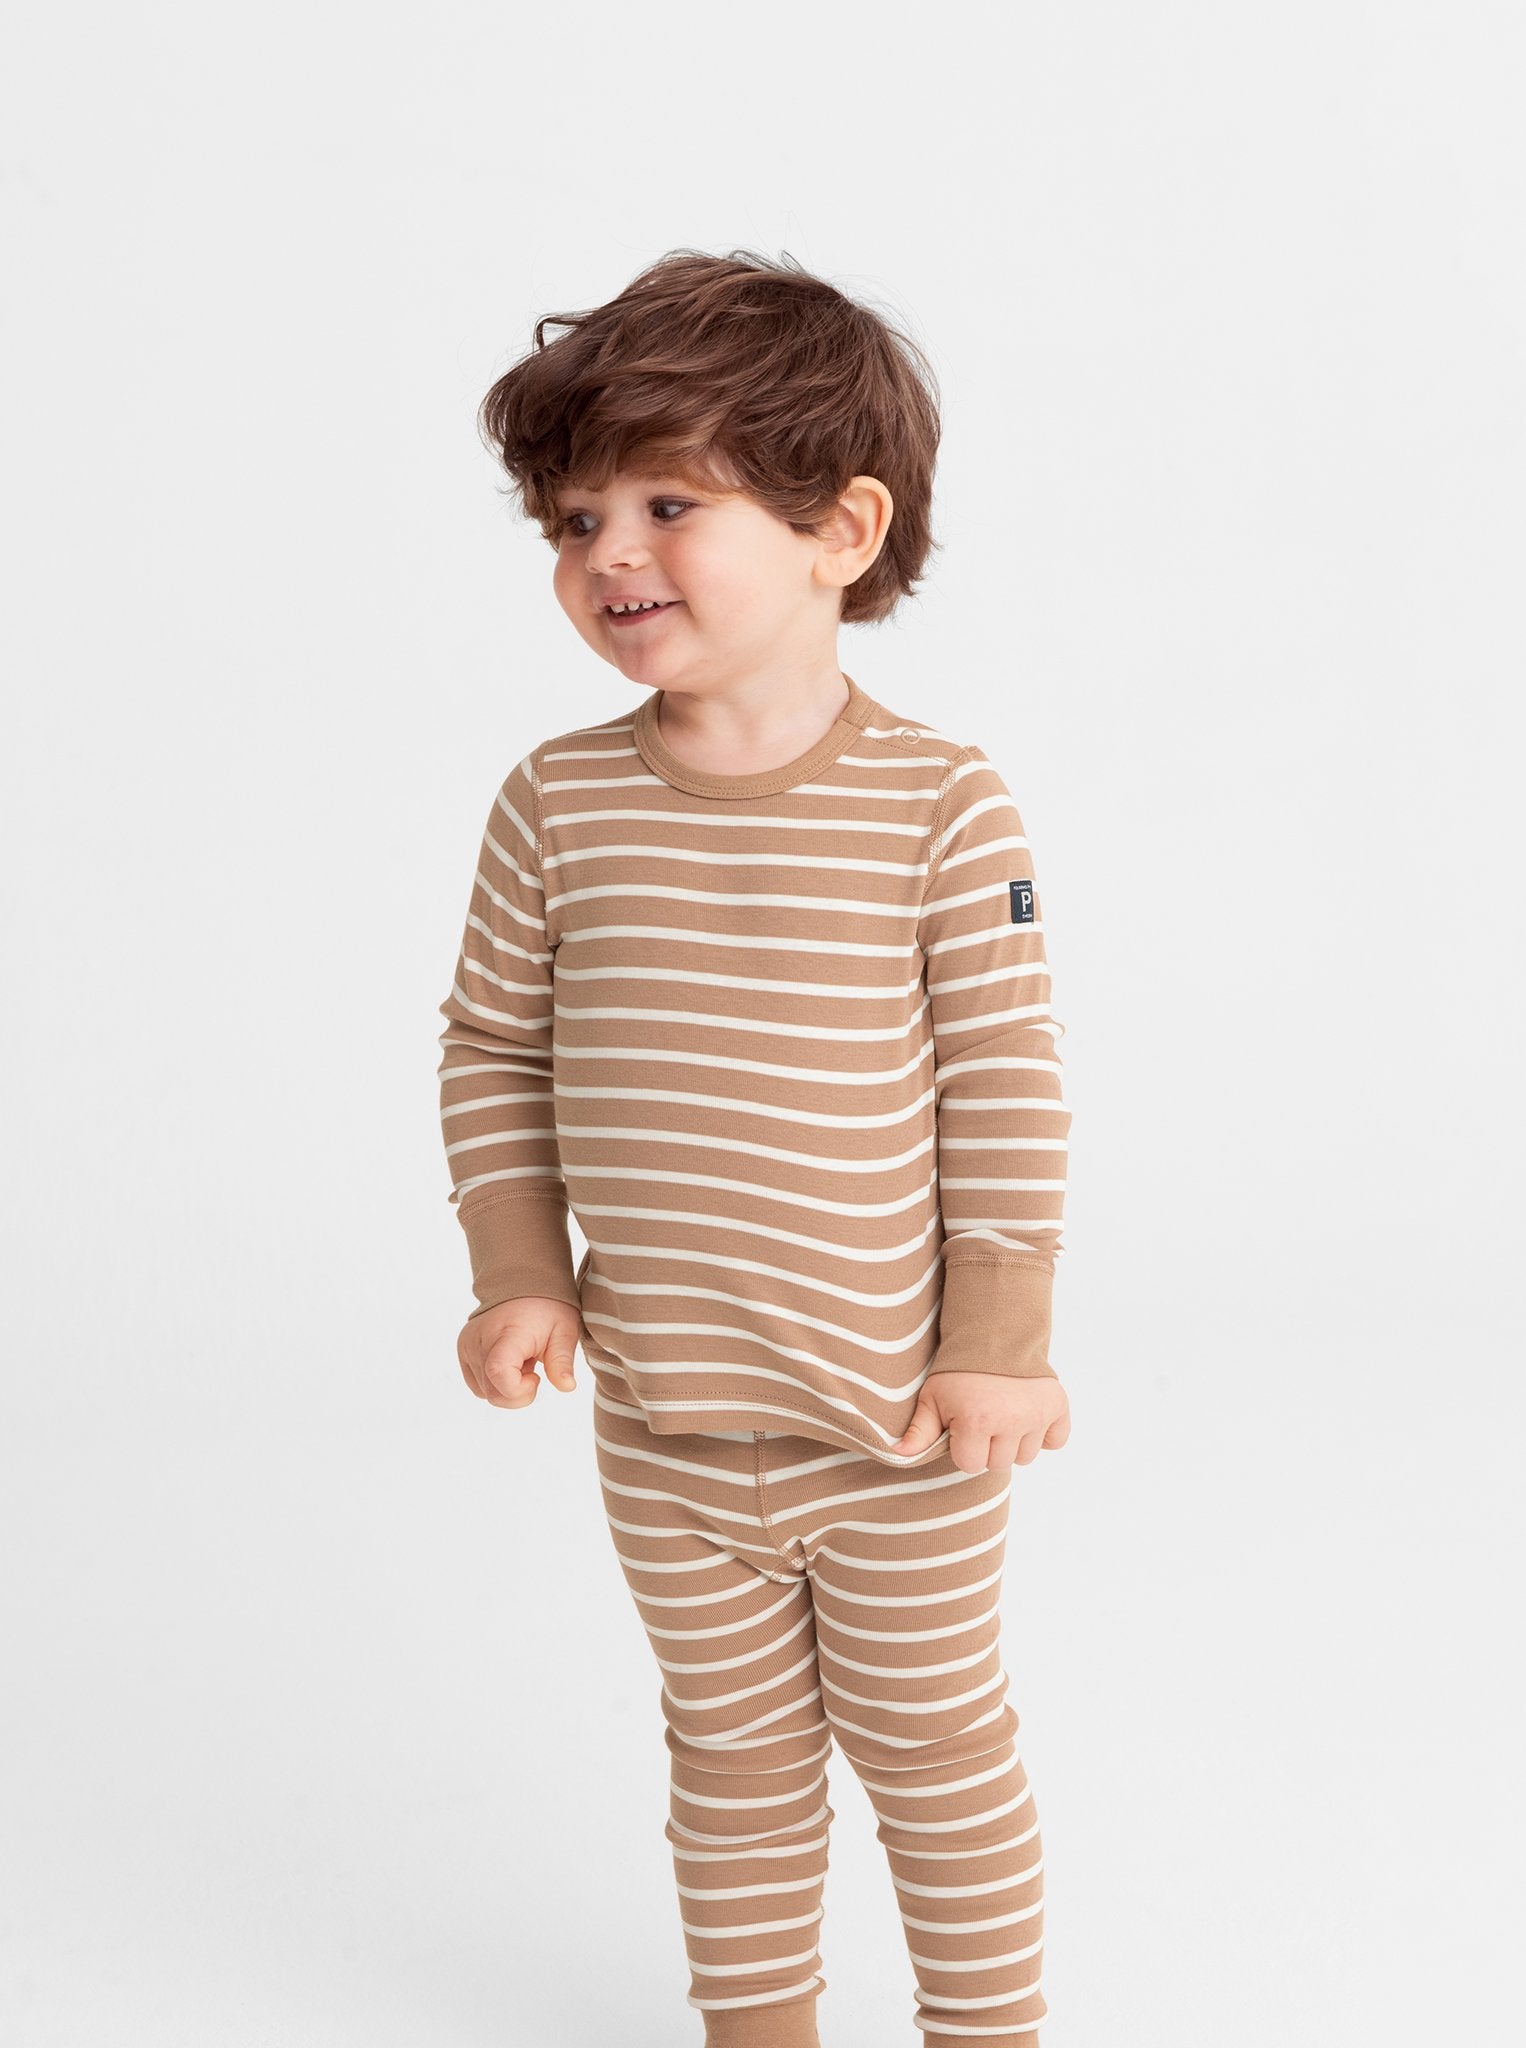  Organic Striped Brown Kids Top from Polarn O. Pyret Kidswear. Made with 100% organic cotton.